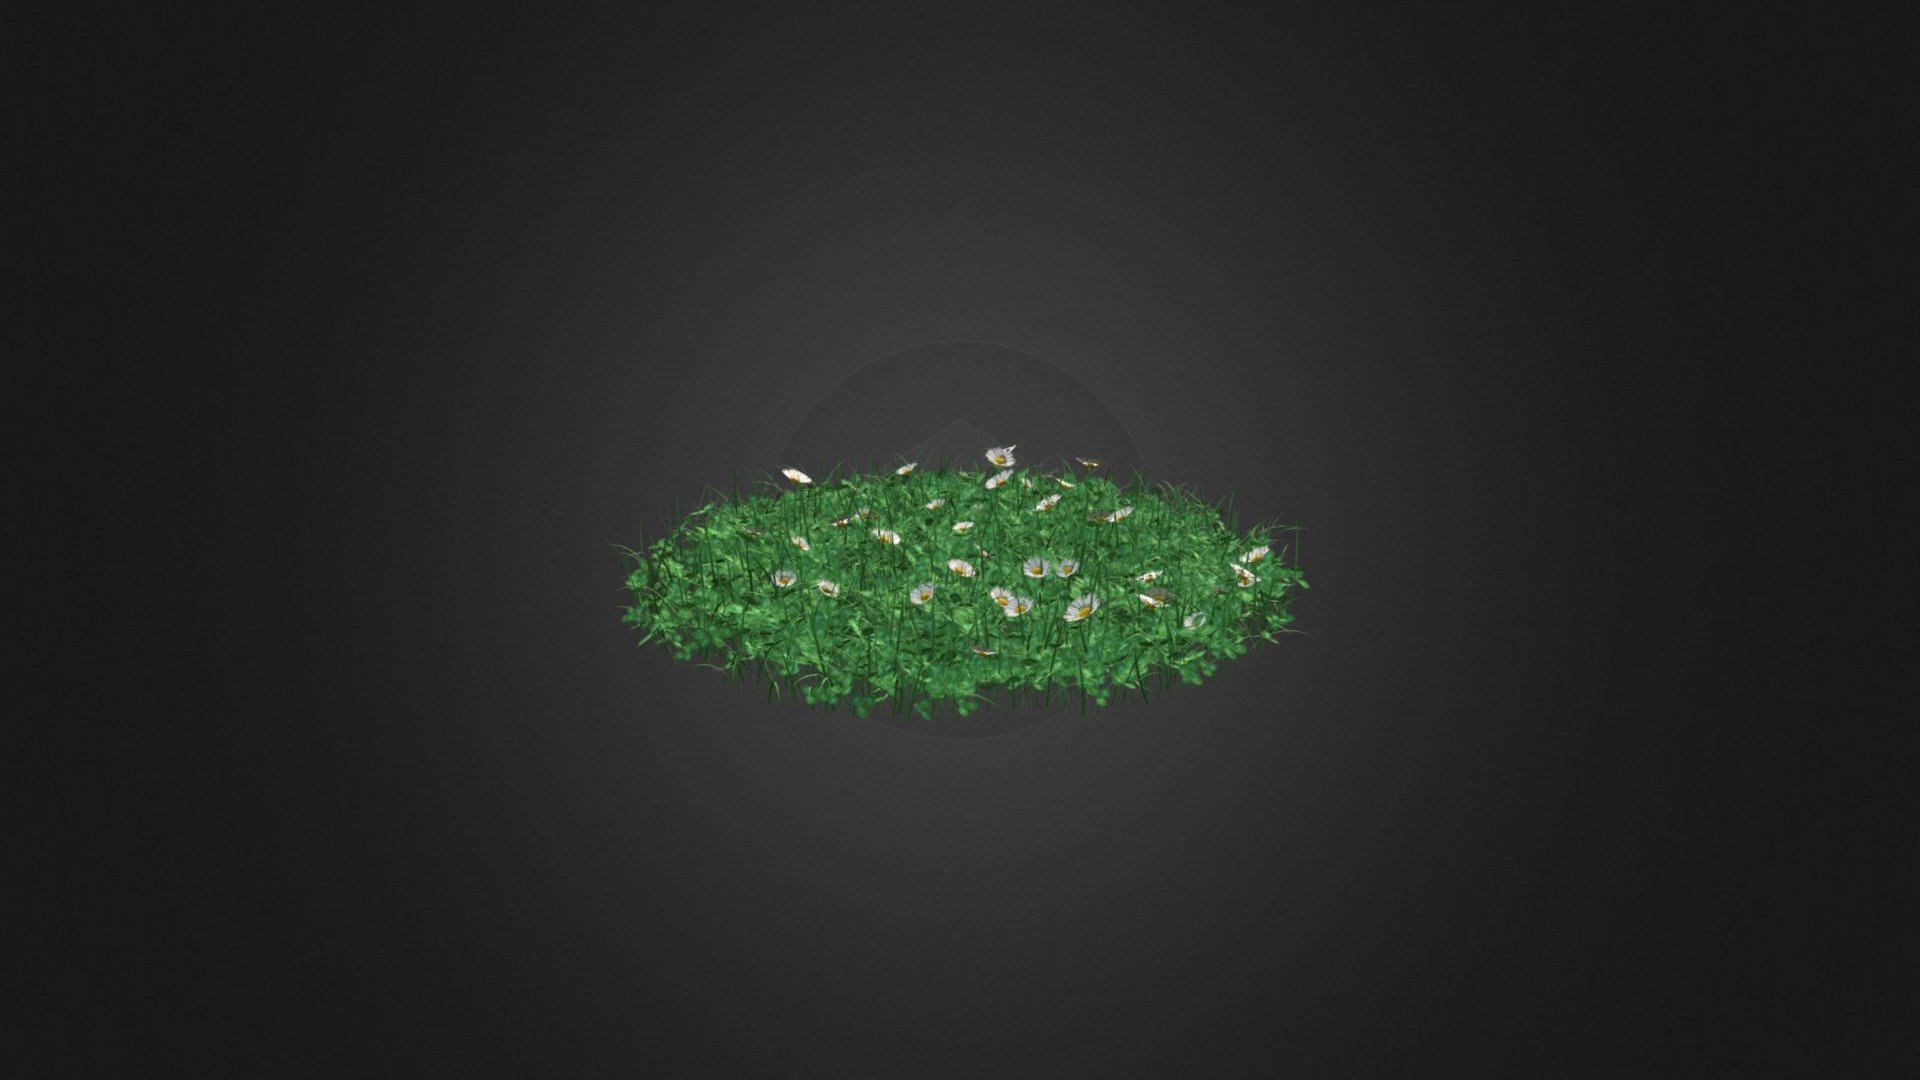 Round shaped grass with some clover and daisy (Bellis perennis) flowers 3d model. Diameter: 100cm. Compatible with 3ds max 2010 or higher, Cinema 4D and many more 3d model